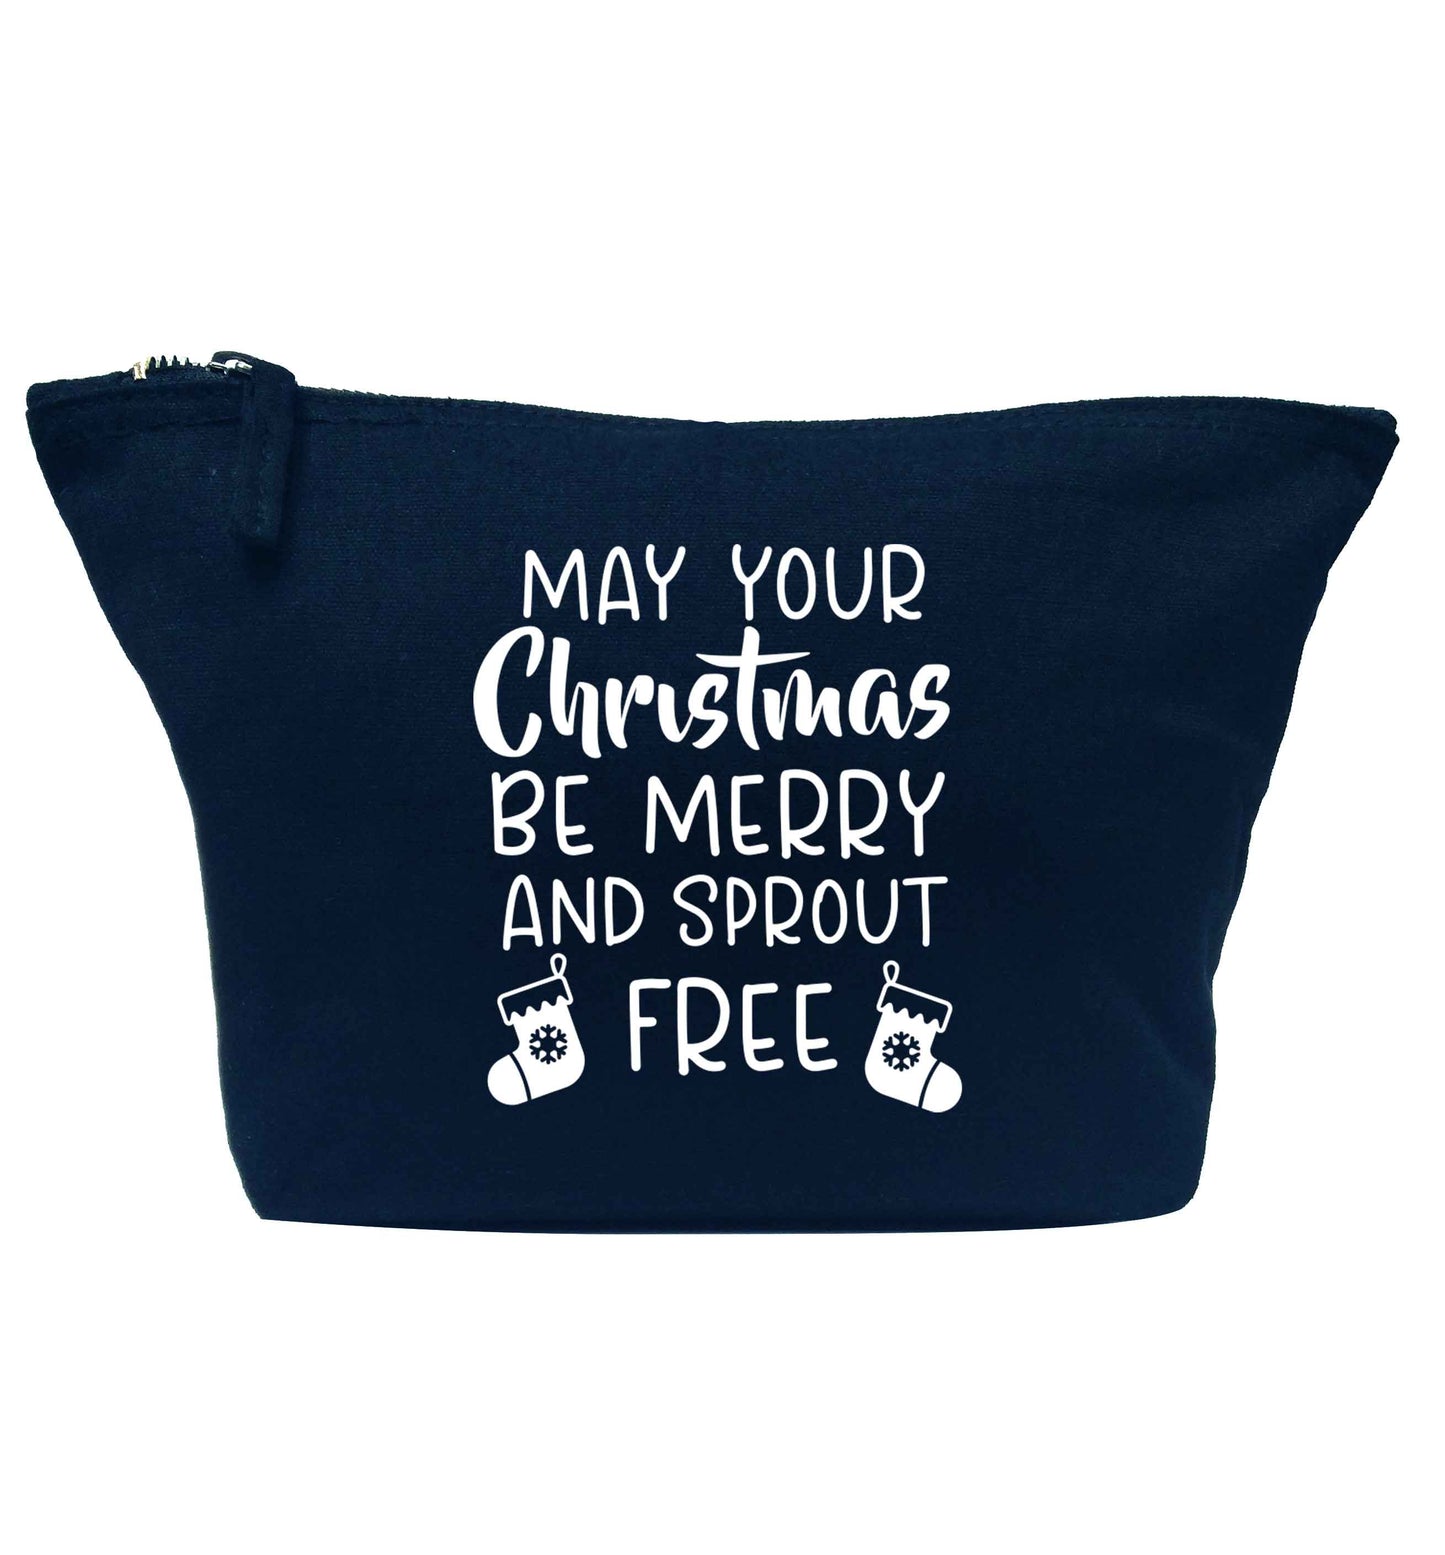 May your Christmas be merry and sprout free navy makeup bag